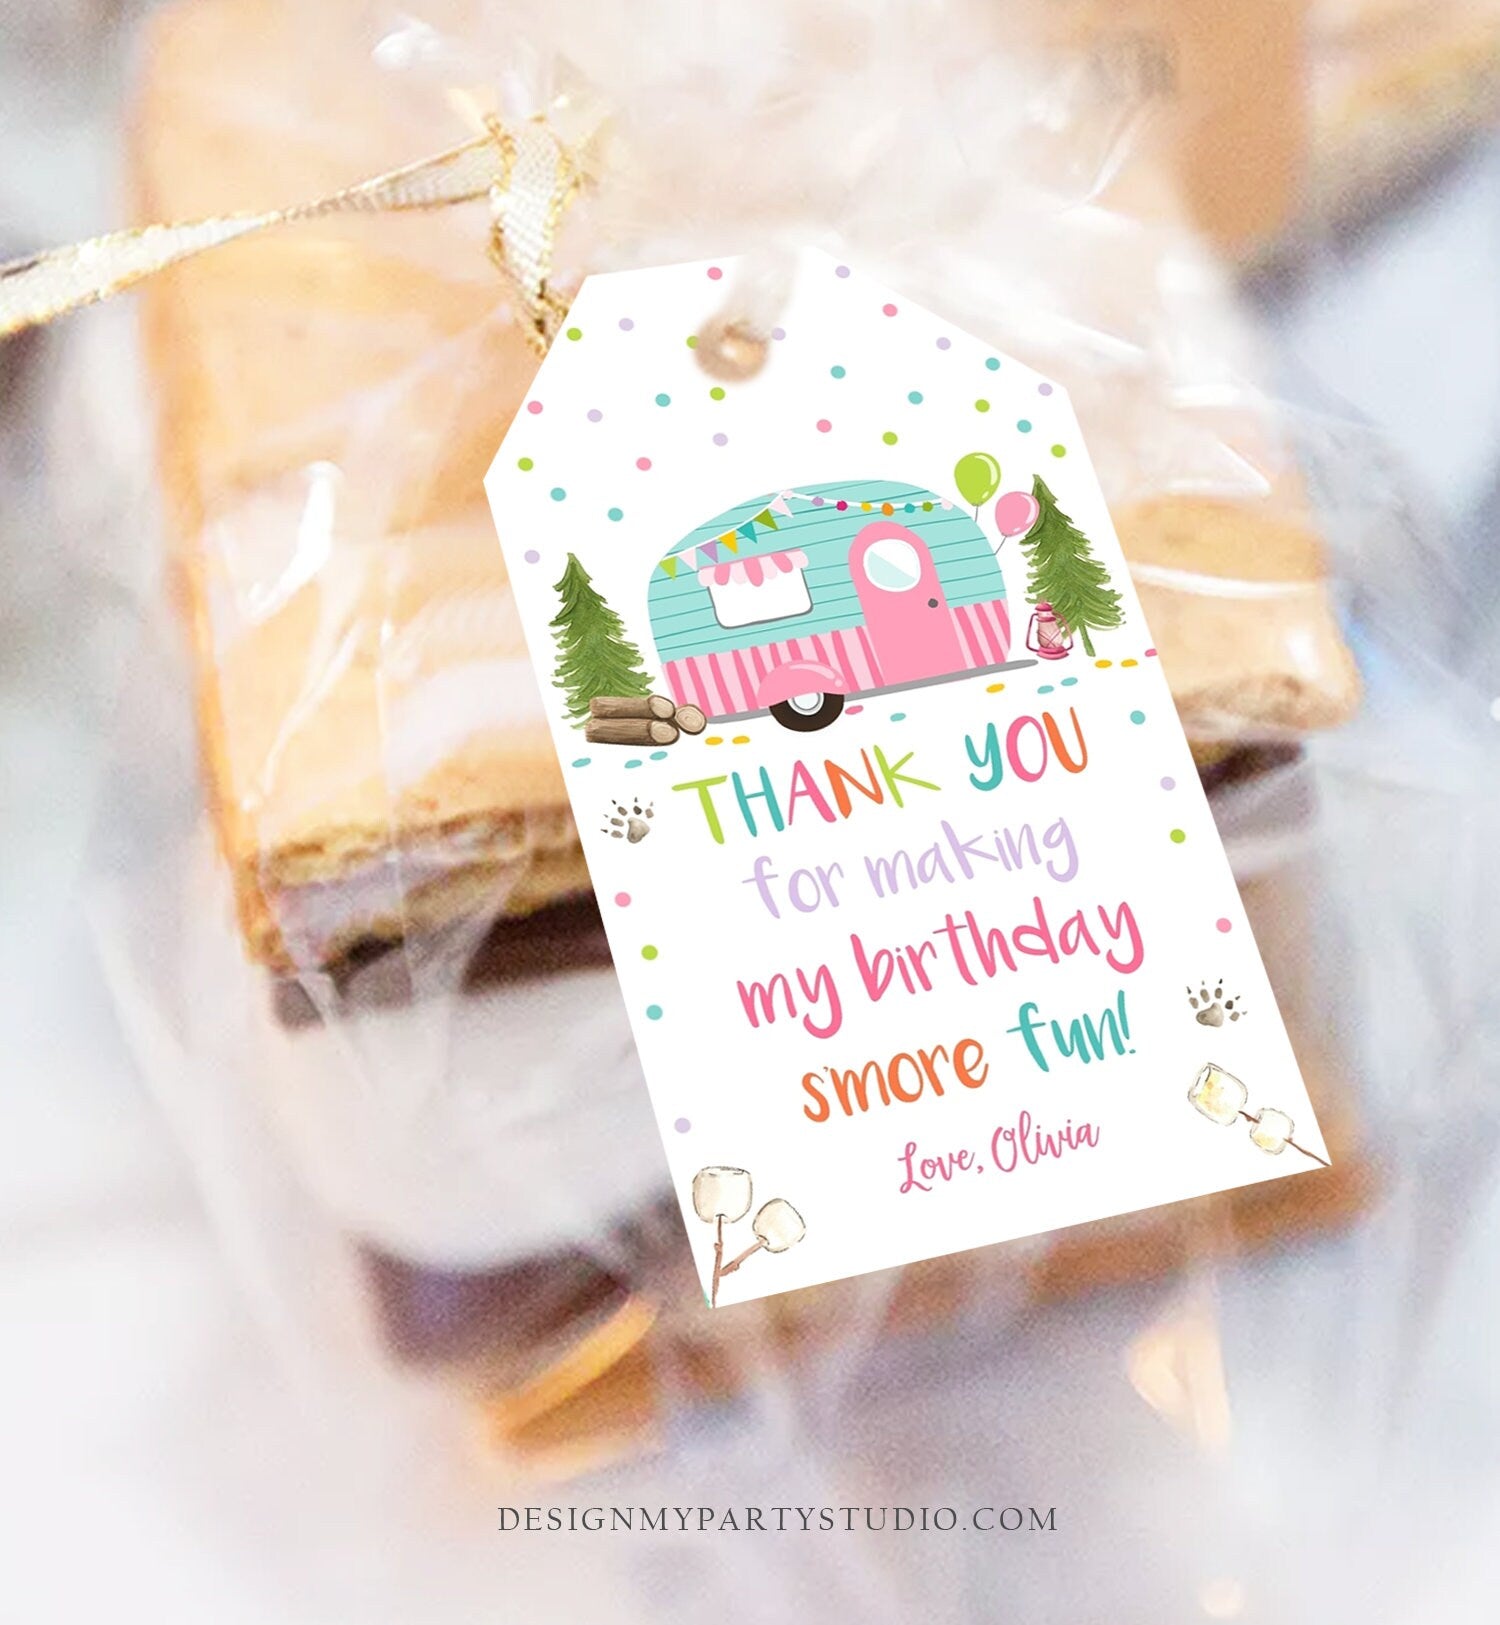 Editable S'more Fun favor Tags Thank you Happy Camper Birthday Party Favor Tags Smore Fun Camping Girl Pink Purple Template PRINTABLE 0342